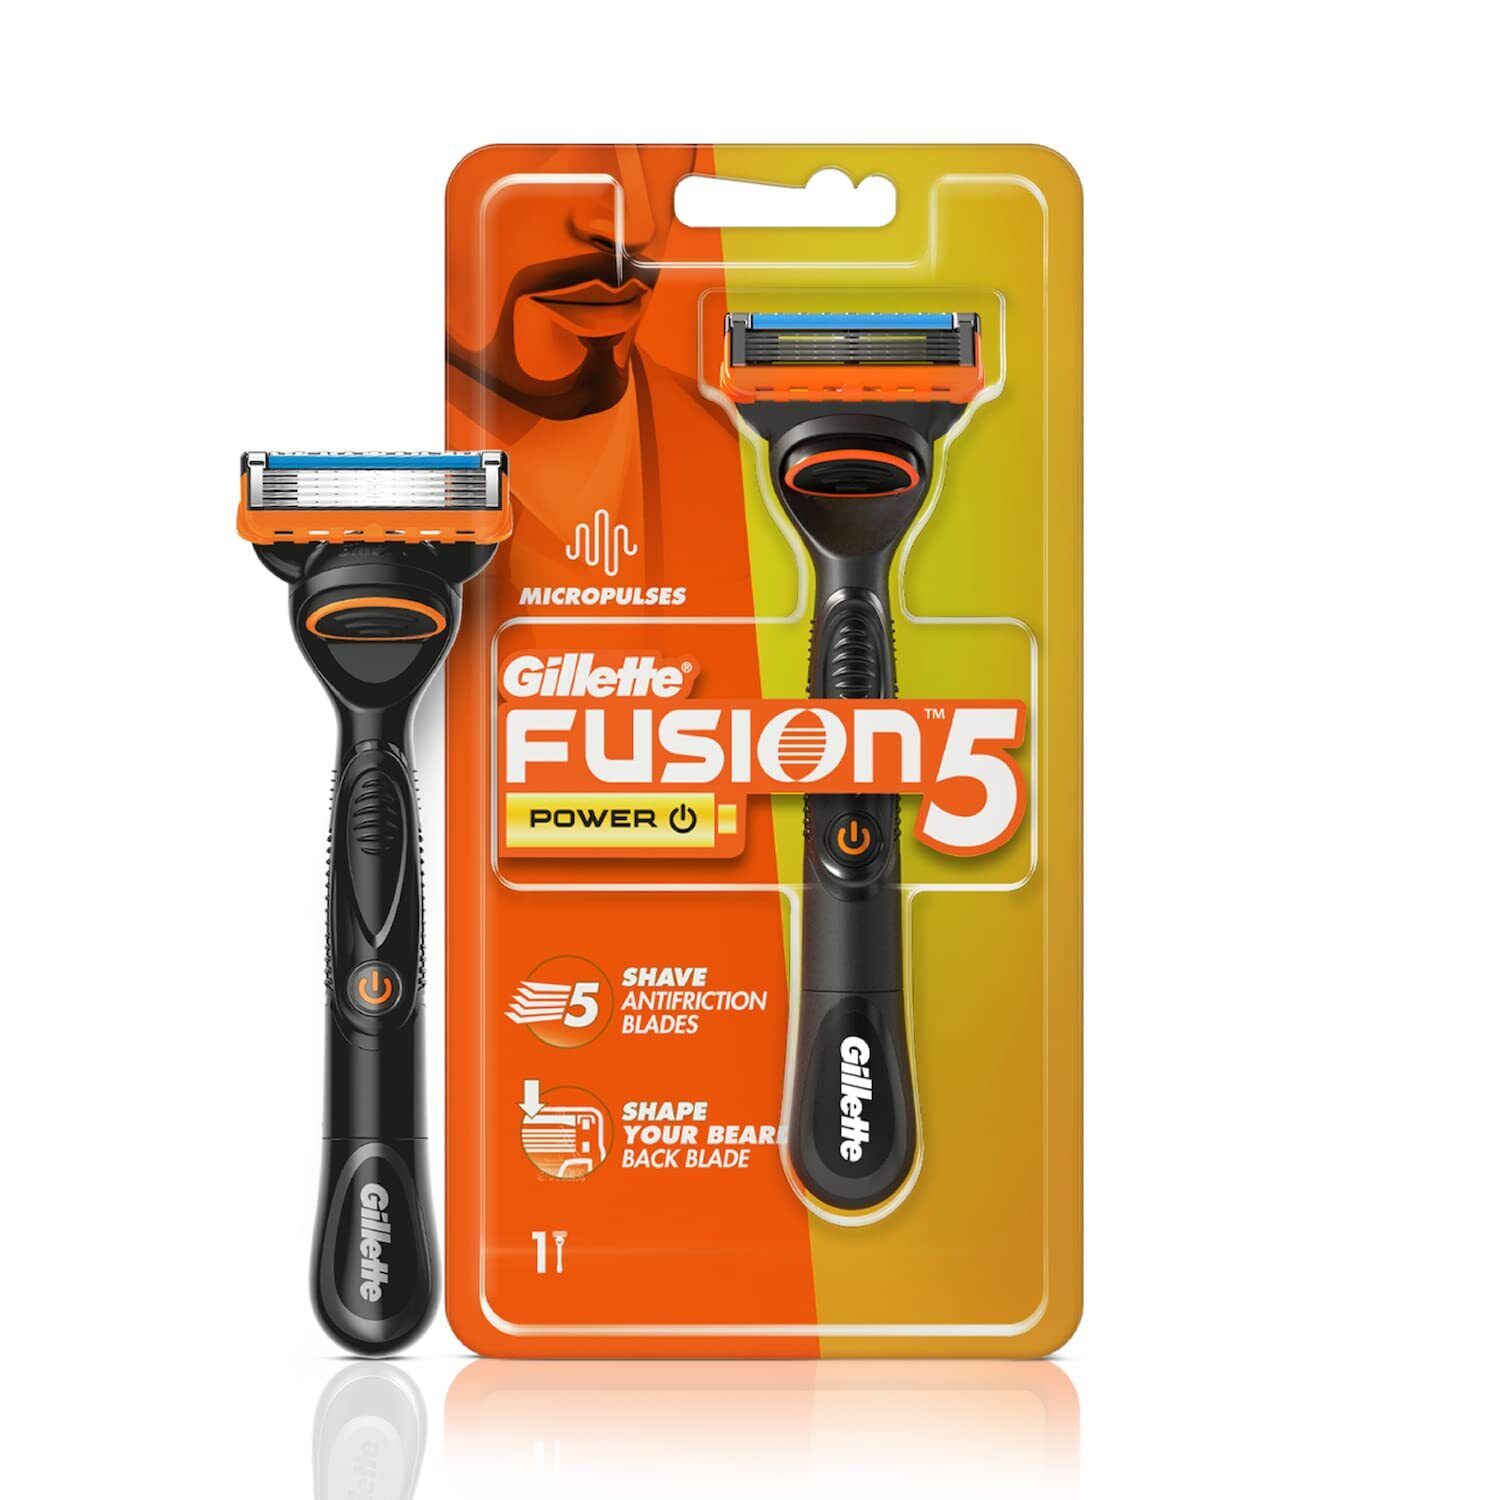 Gillette Fusion Power Razor for Men with styling back blade for Perfect Shave